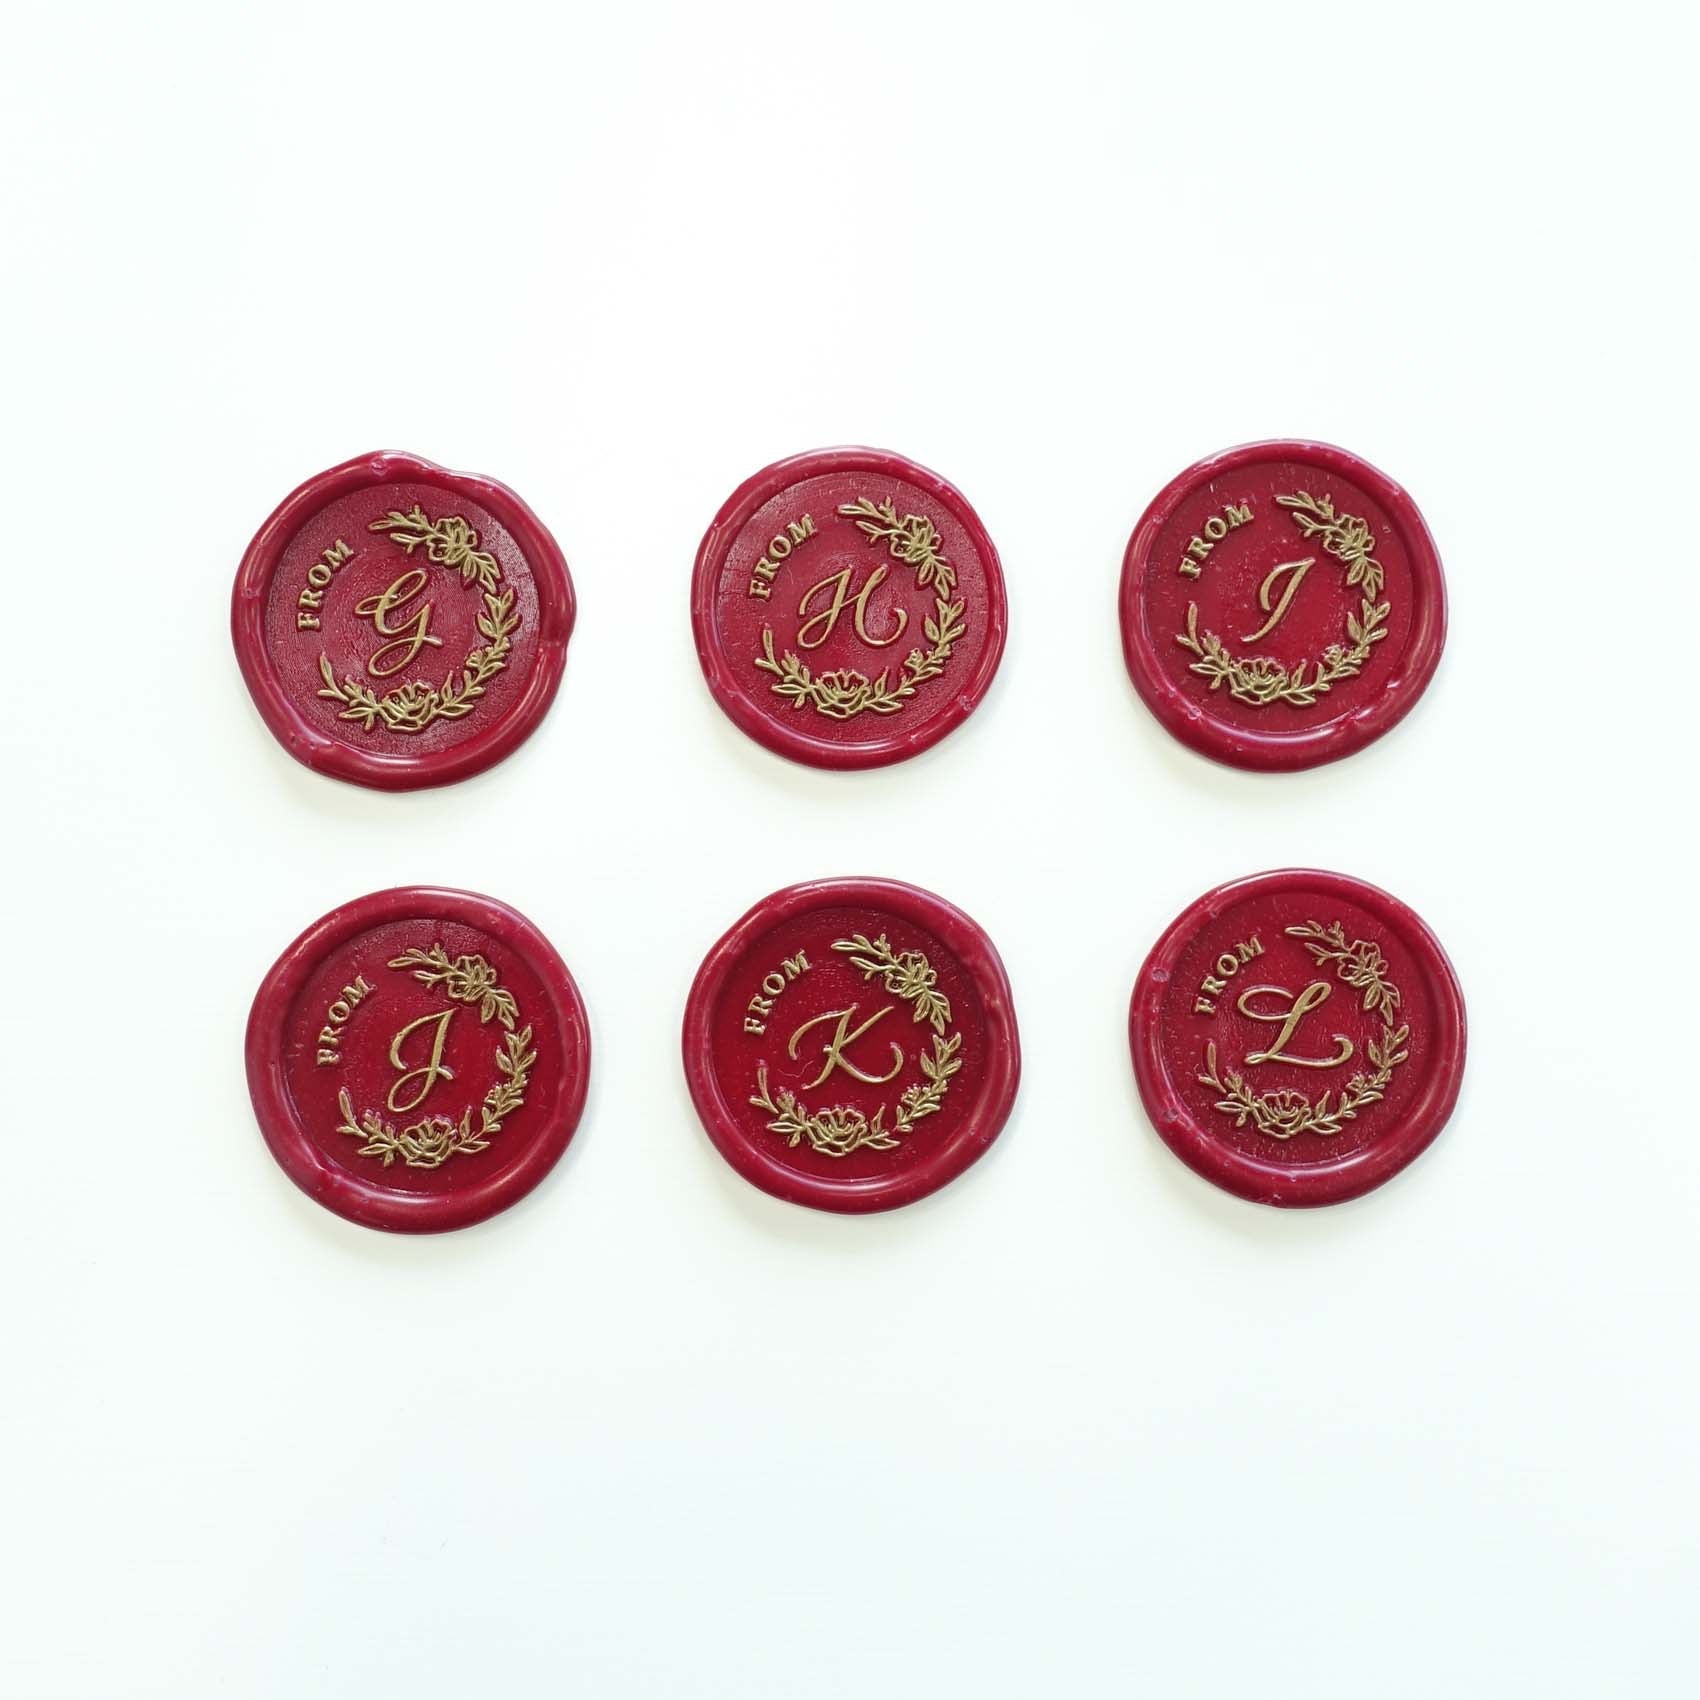 From A to Z Alphabet Letters - Wax Seal Stamp (includes handle)